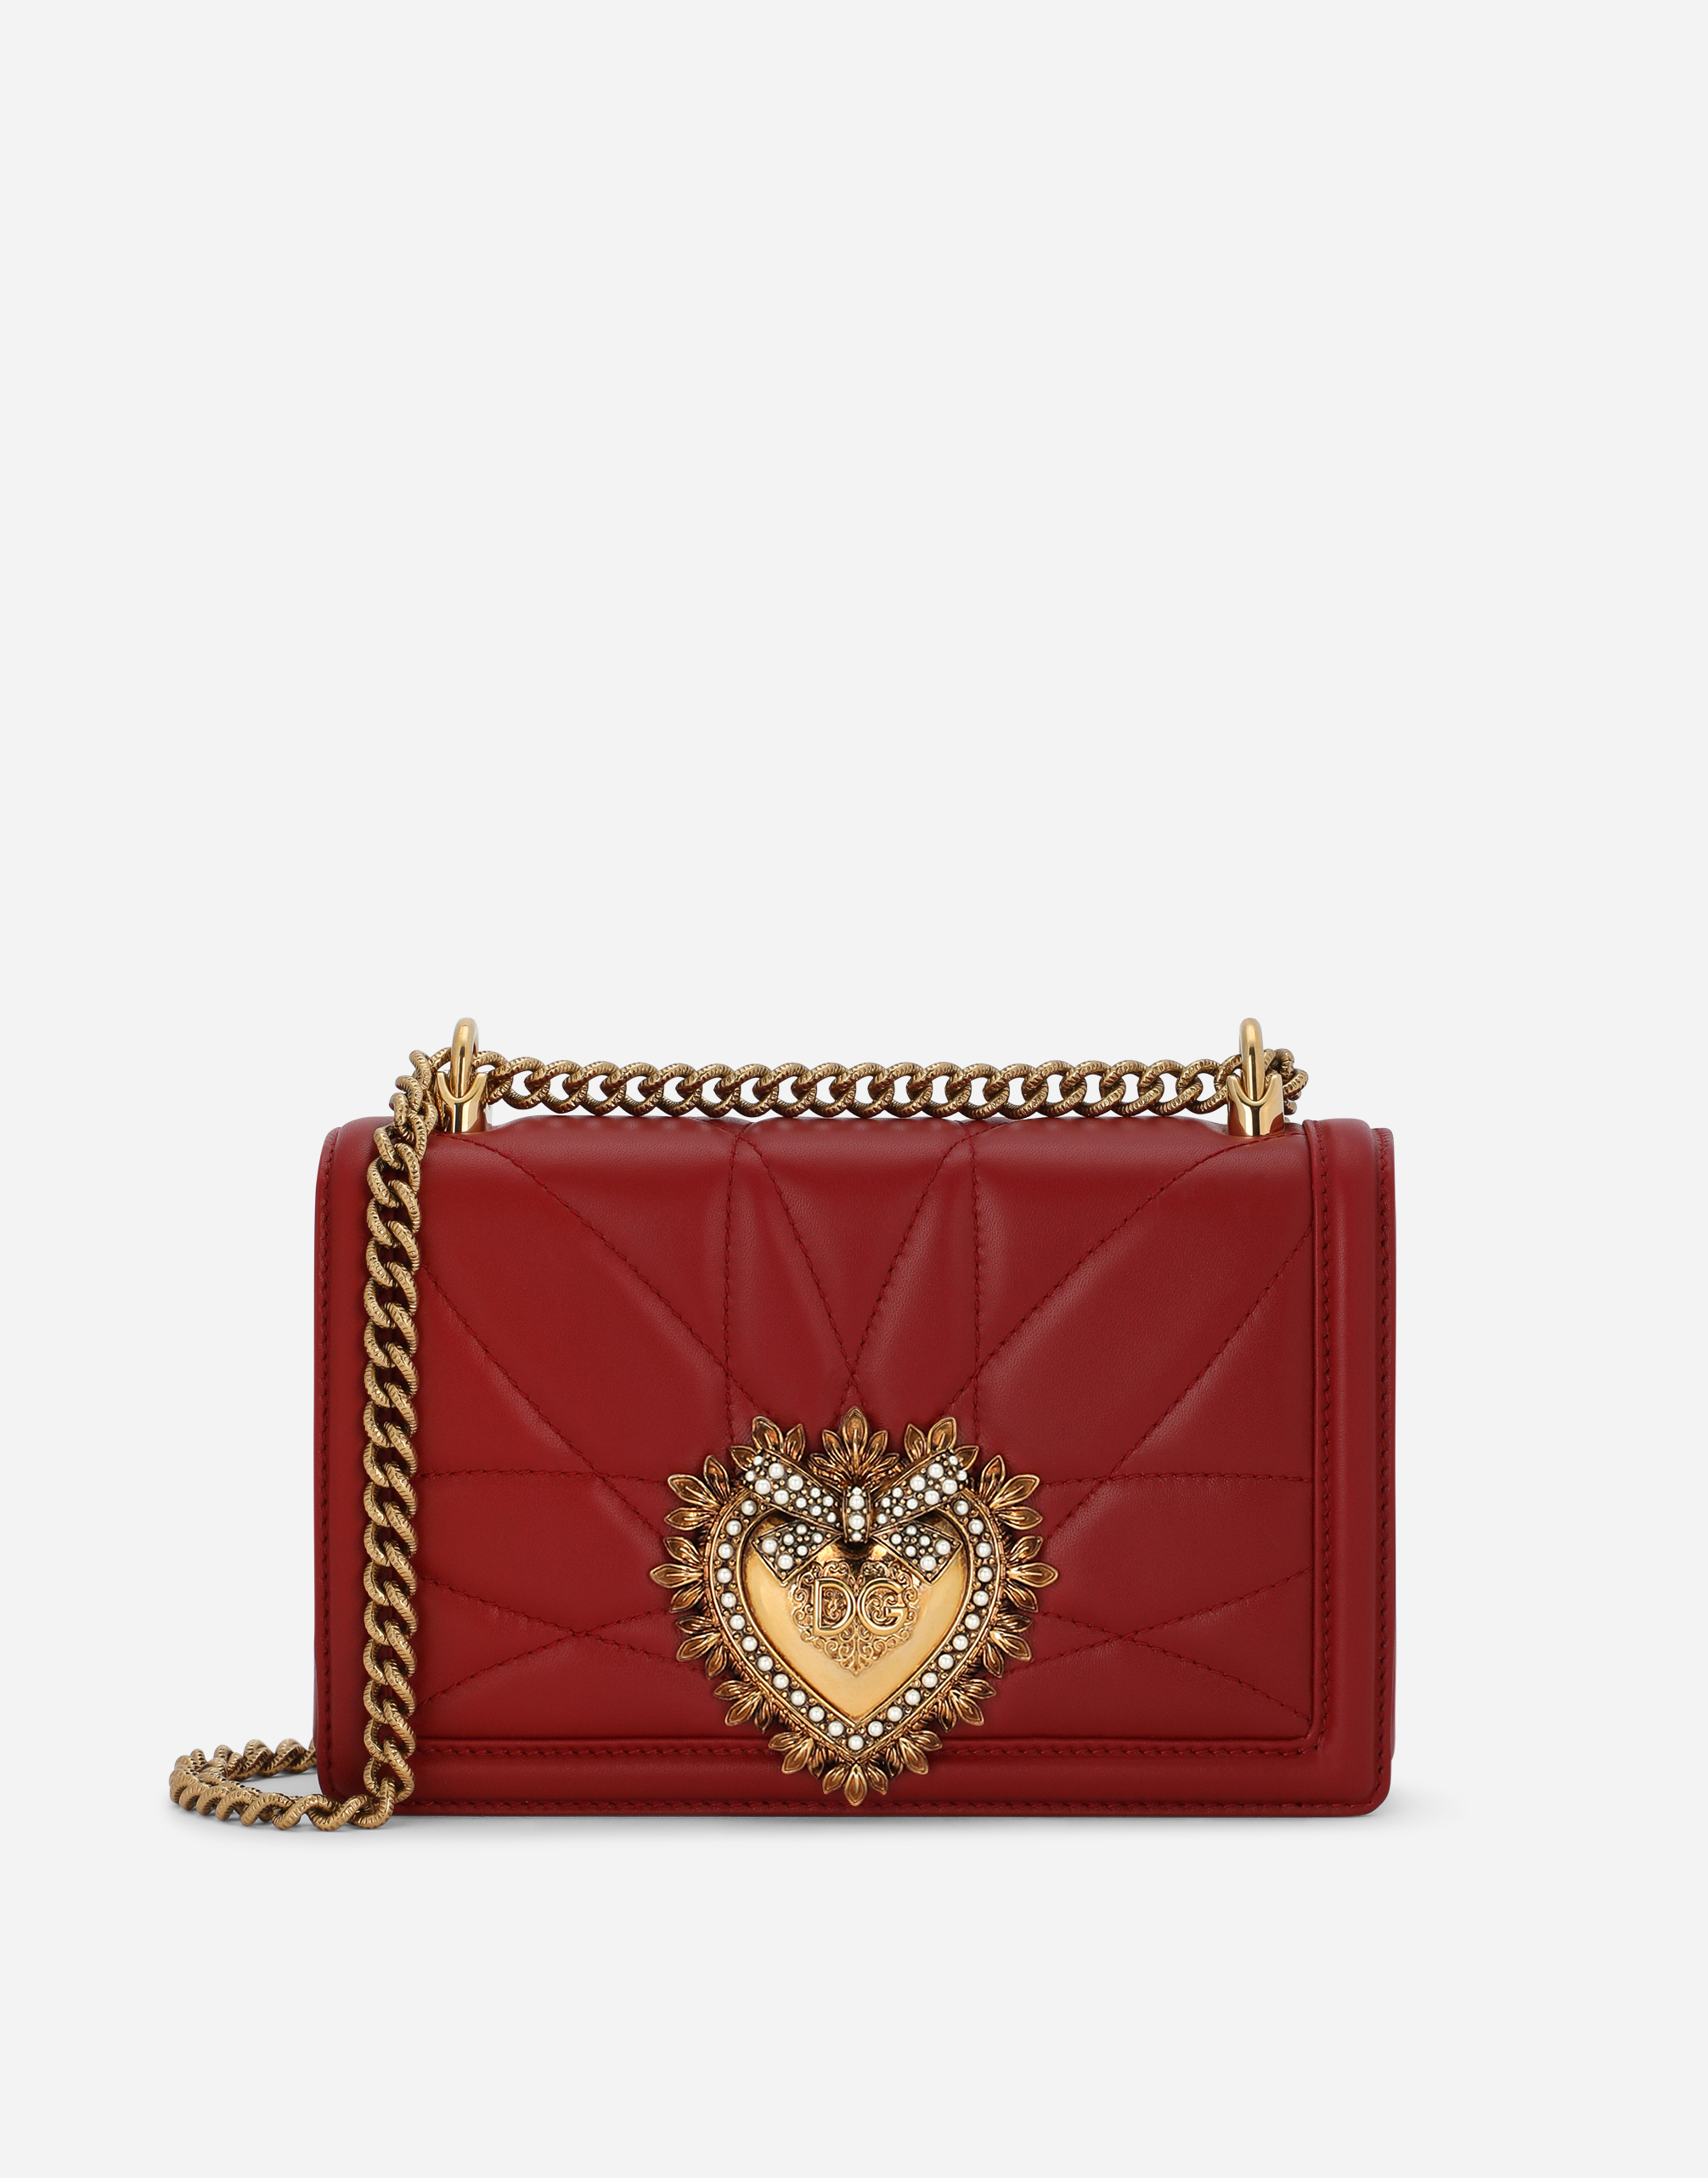 MEDIUM DEVOTION BAG IN QUILTED NAPPA LEATHER in Red